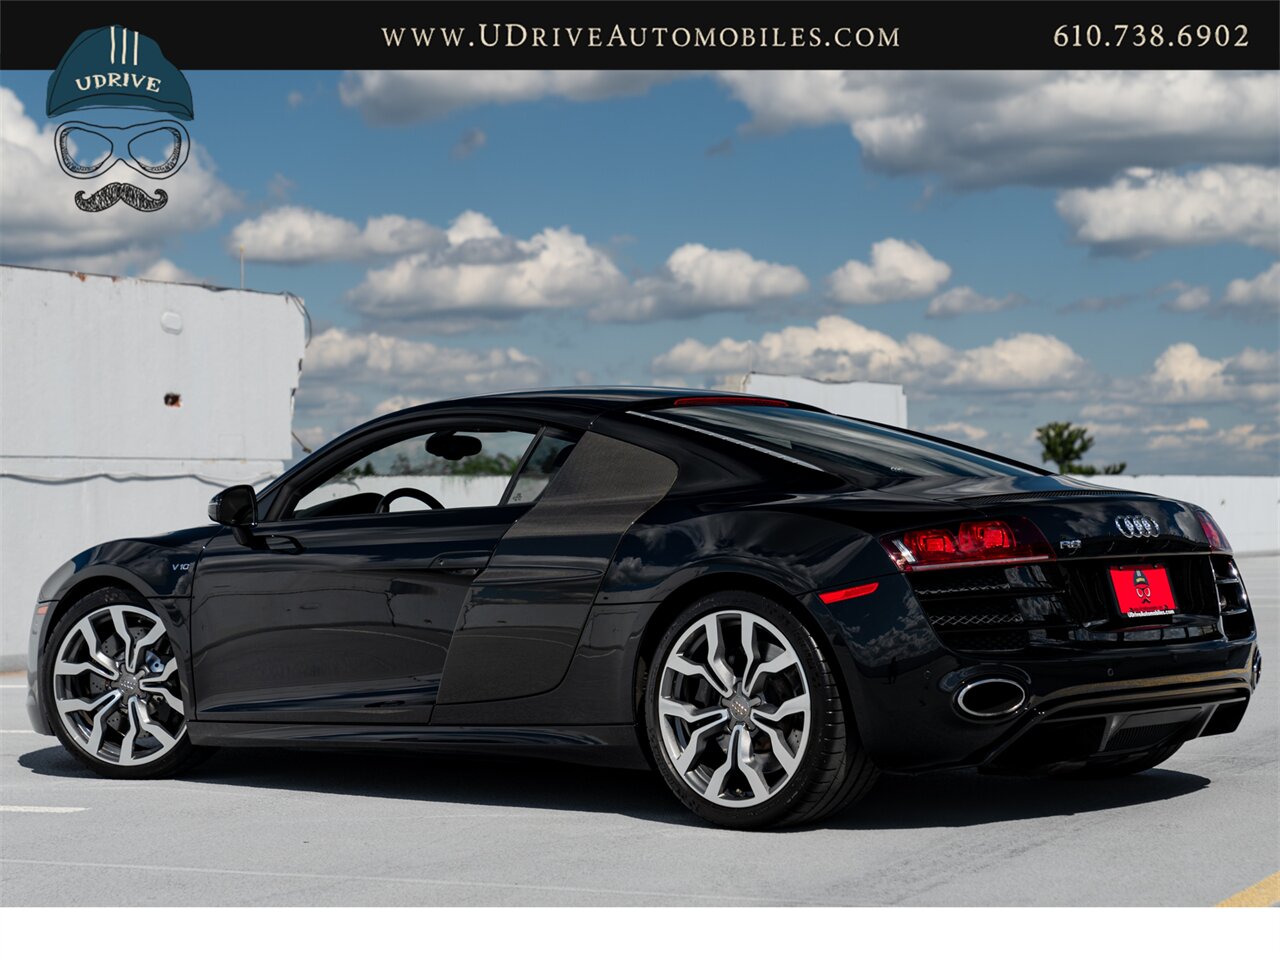 2011 Audi R8 5.2 Quattro  V10 6 Speed Manual - Photo 4 - West Chester, PA 19382